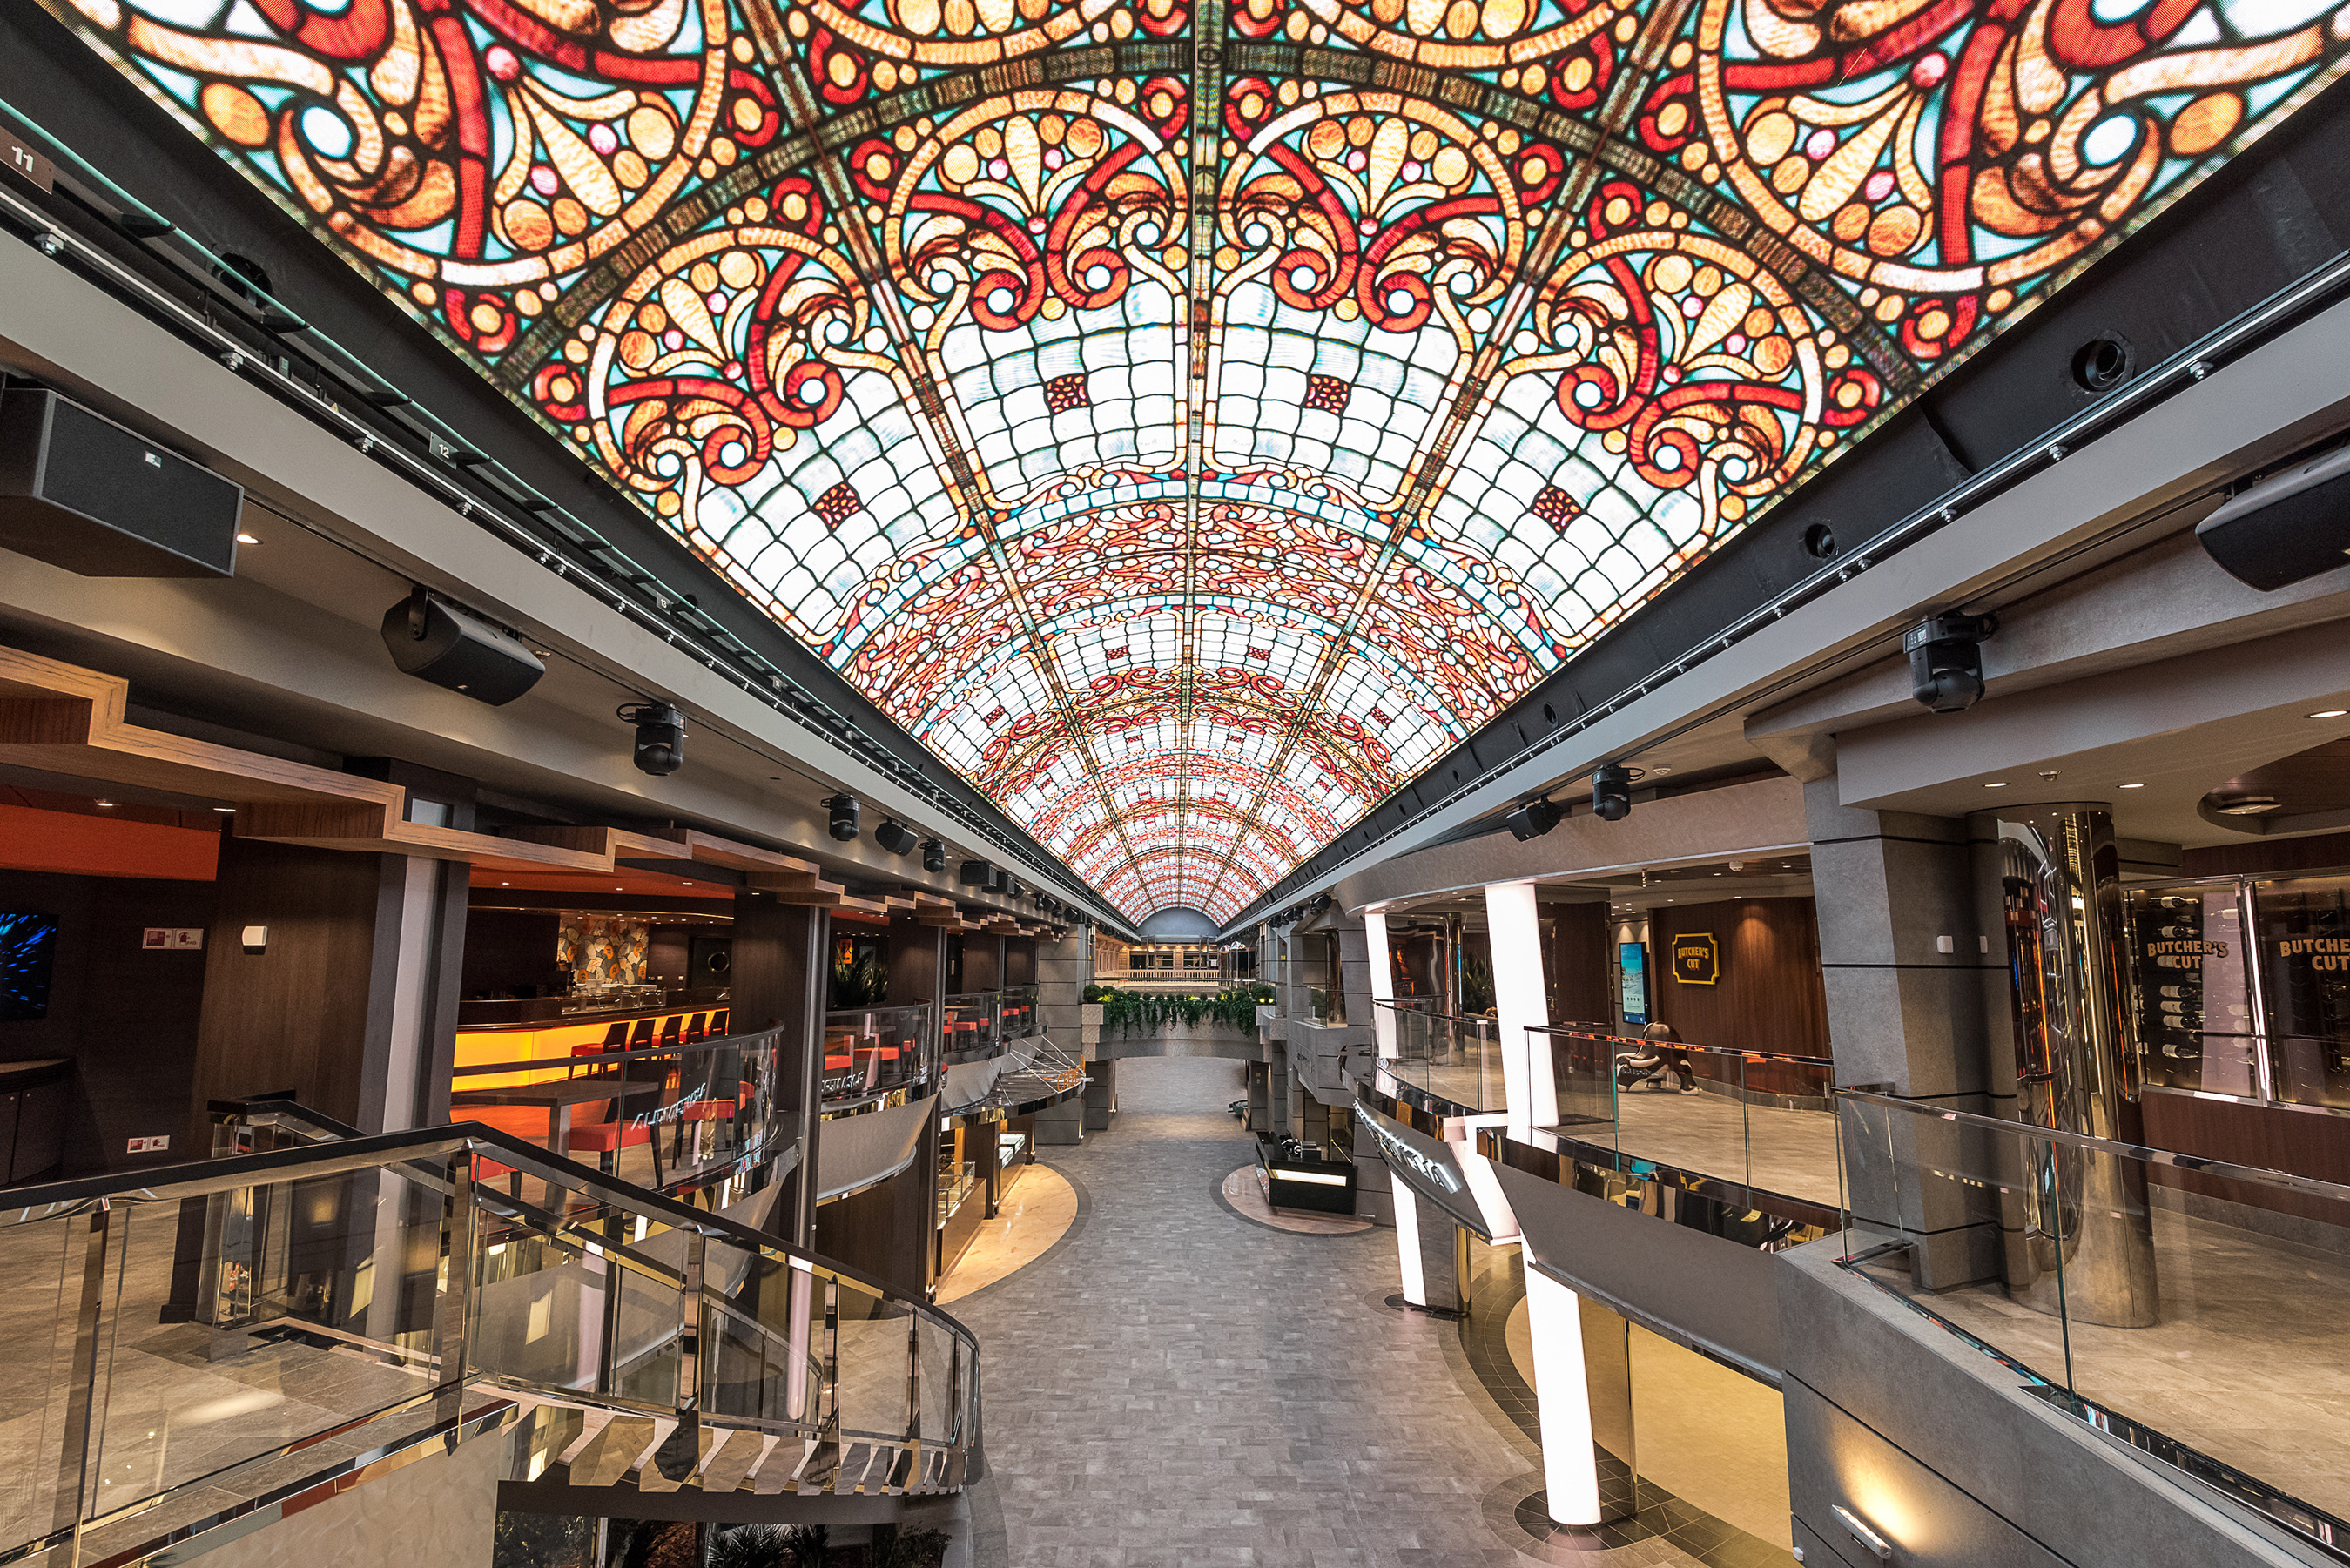 MSC Meraviglia boasts a unique, two-story Mediterranean-style promenade featuring the longest LED Dome at sea, a range of international culinary offerings and exclusive Cirque du Soleil at Sea shows.